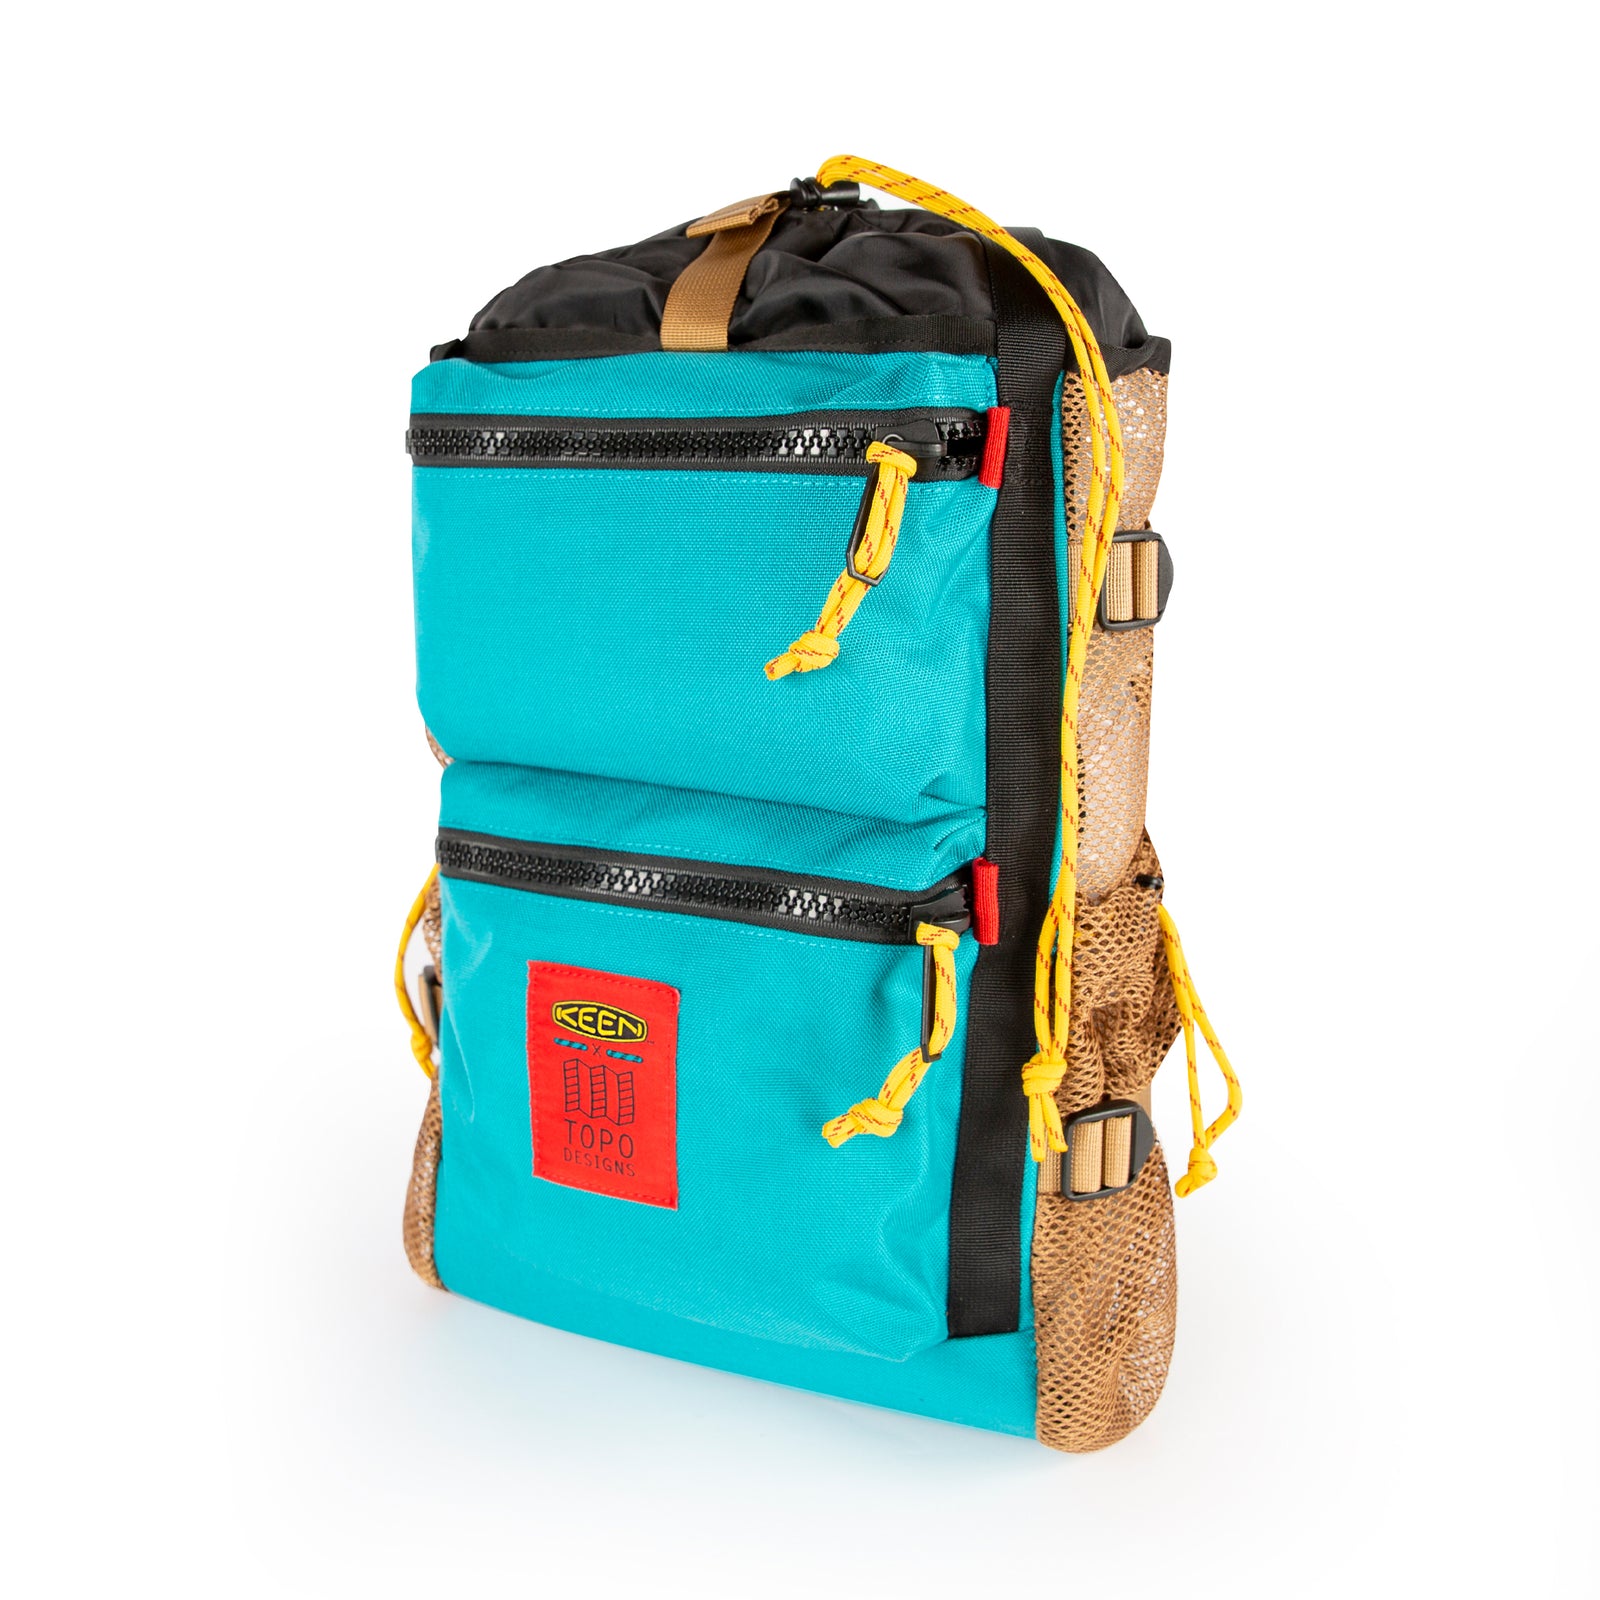 Topo Designs x Keen River Backpack Tote bag in Turquoise